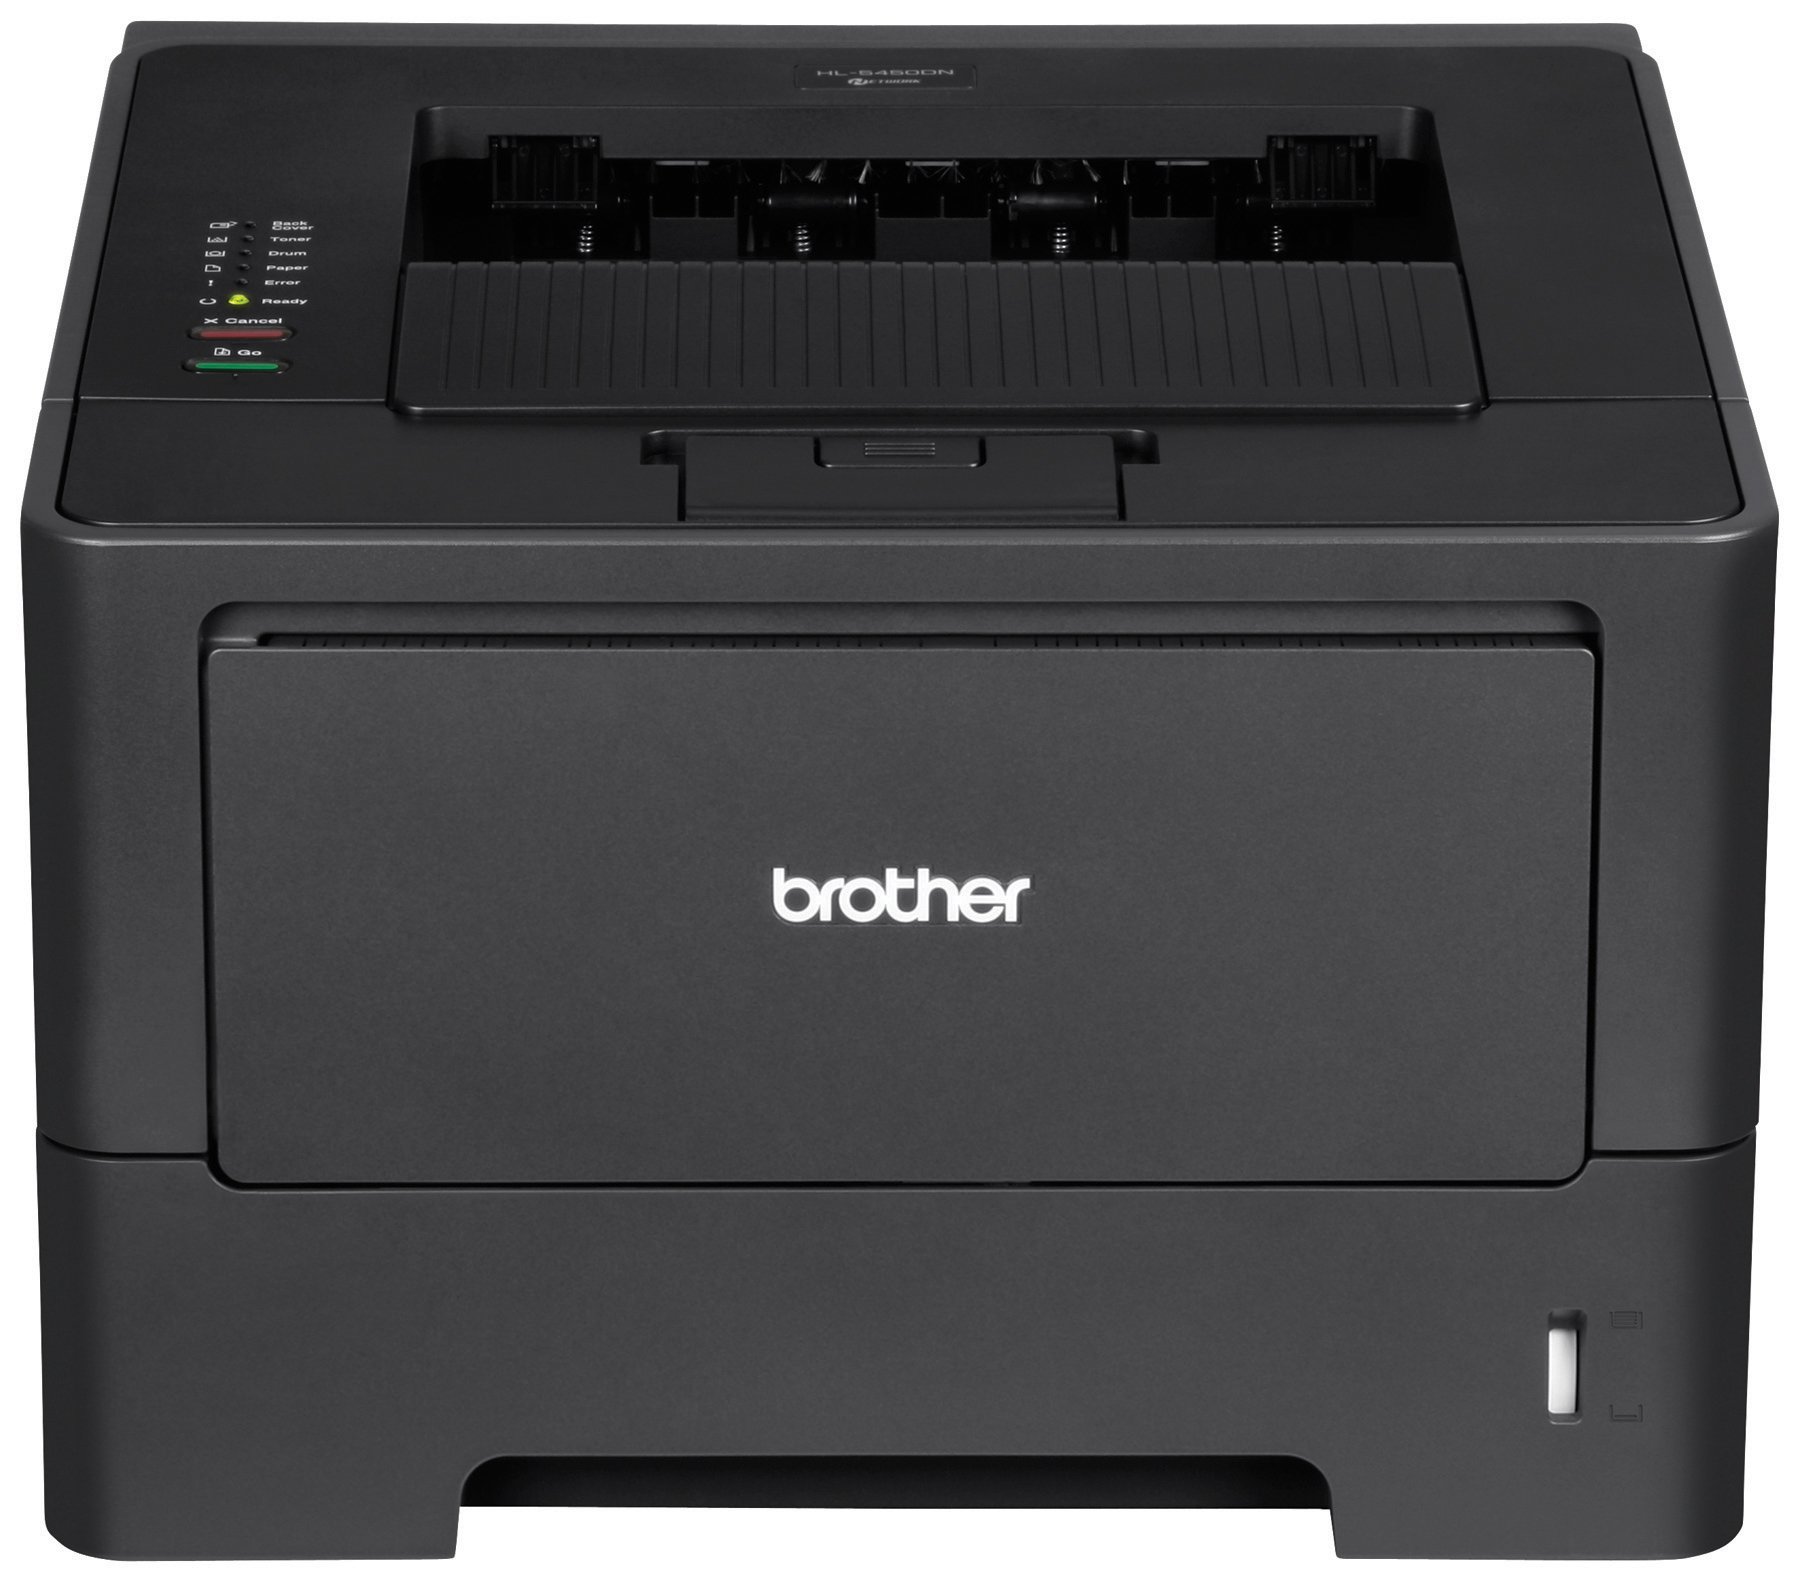 Brother HL5450DN High-Speed Laser Printer with Networking and Duplex, Amazon Dash Replenishment Ready